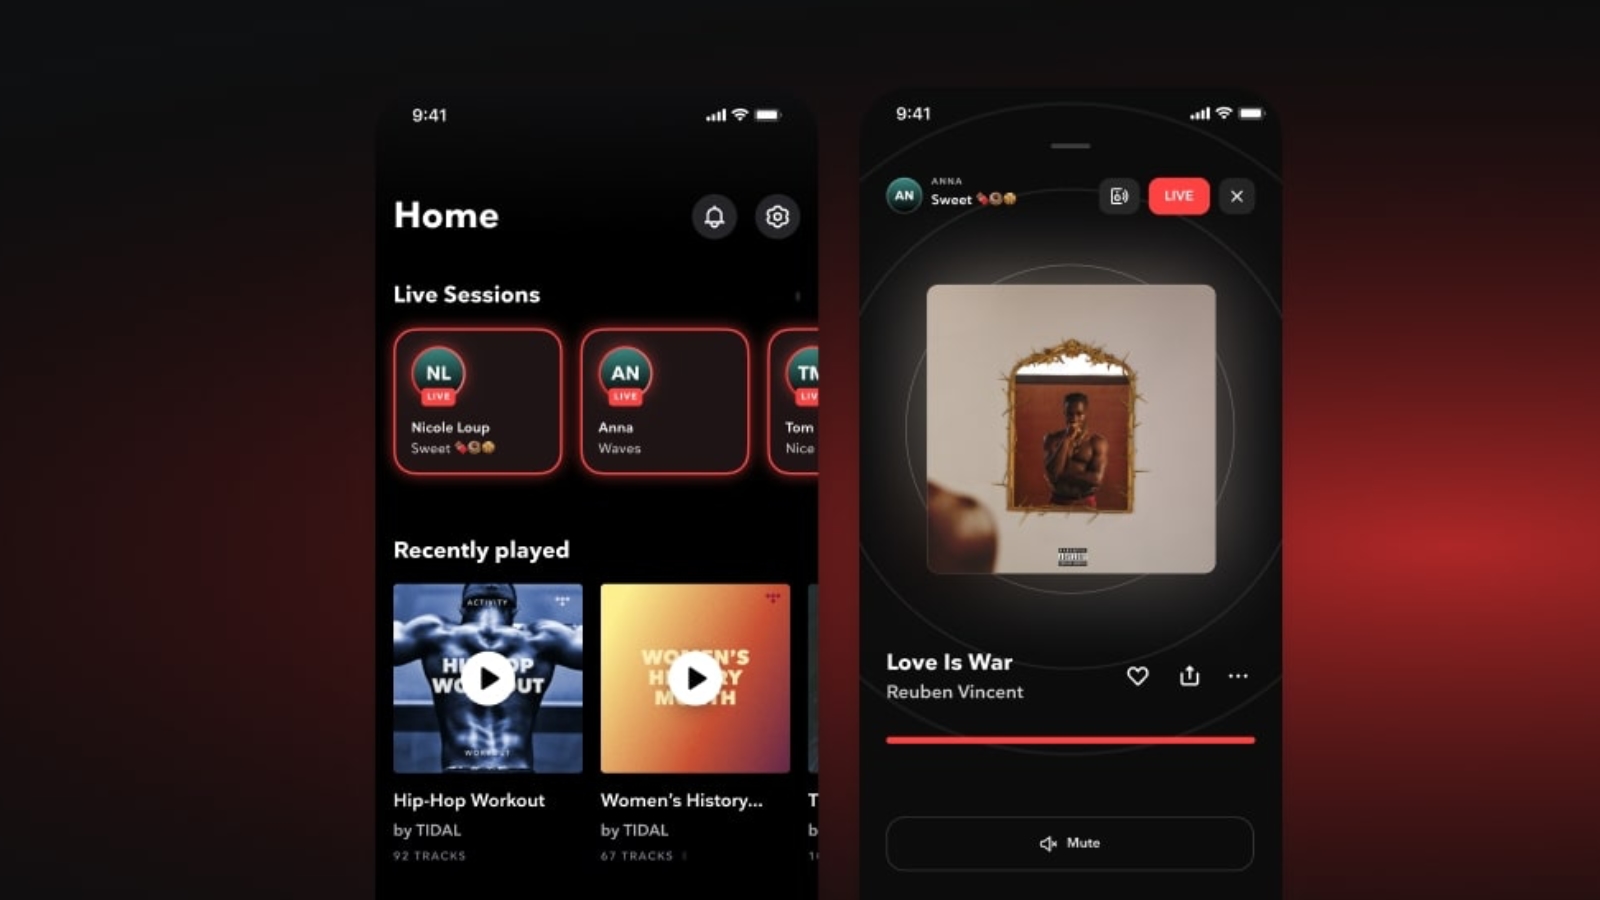 Tidal’s new live feature will let you host a live DJing session